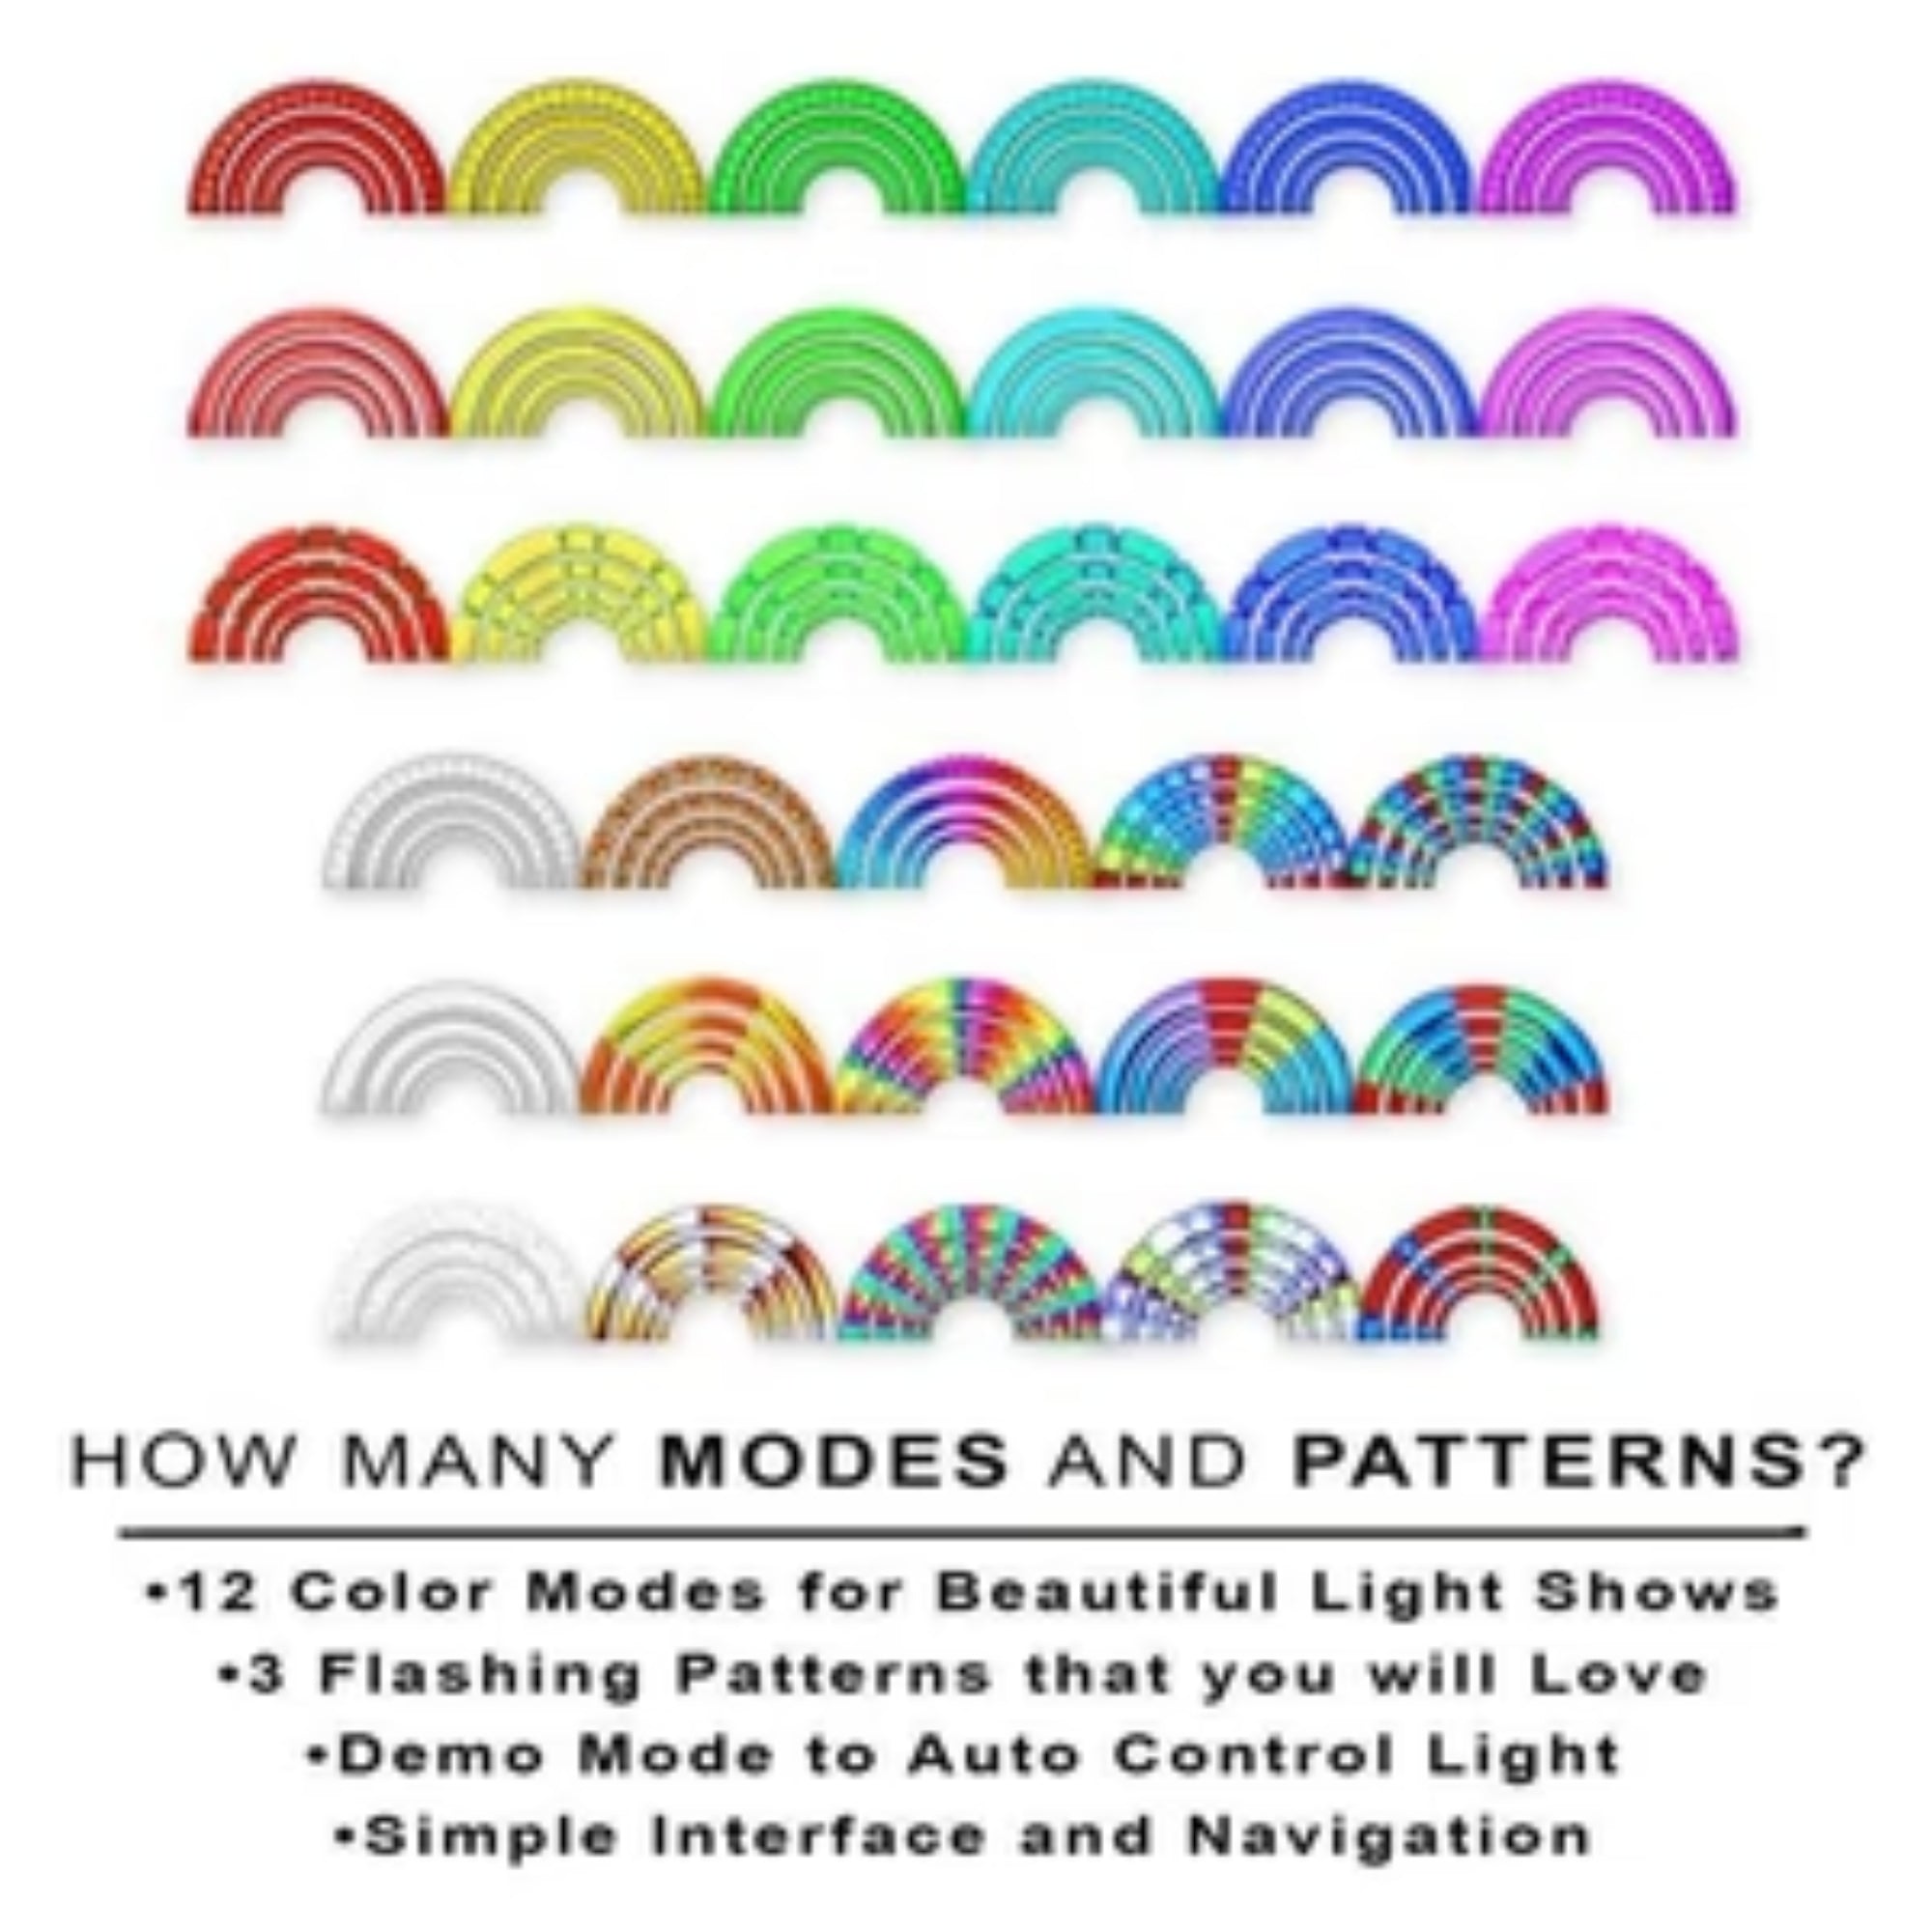 modes and patterns info